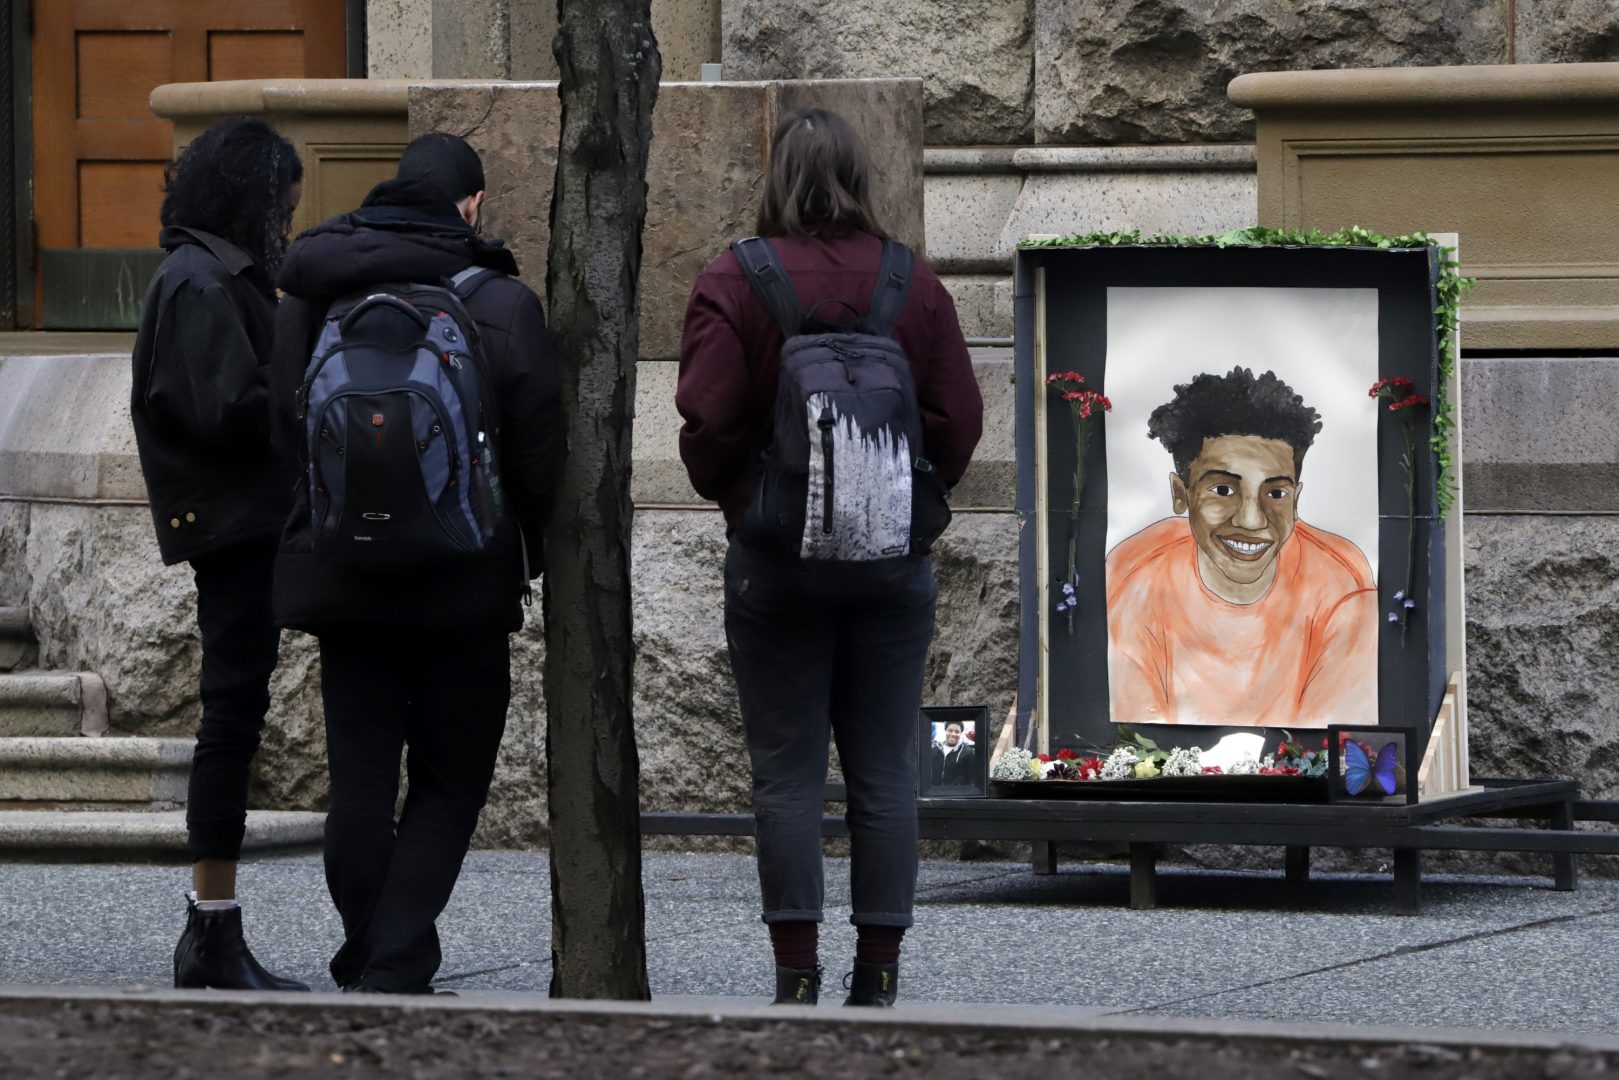 People gather in front of a memorial display with a drawing of Antwon Rose II in front of the Allegheny County courthouse on the second day of the trial for Michael Rosfeld, a former police officer in East Pittsburgh, Pa., Wednesday, March 20, 2019.